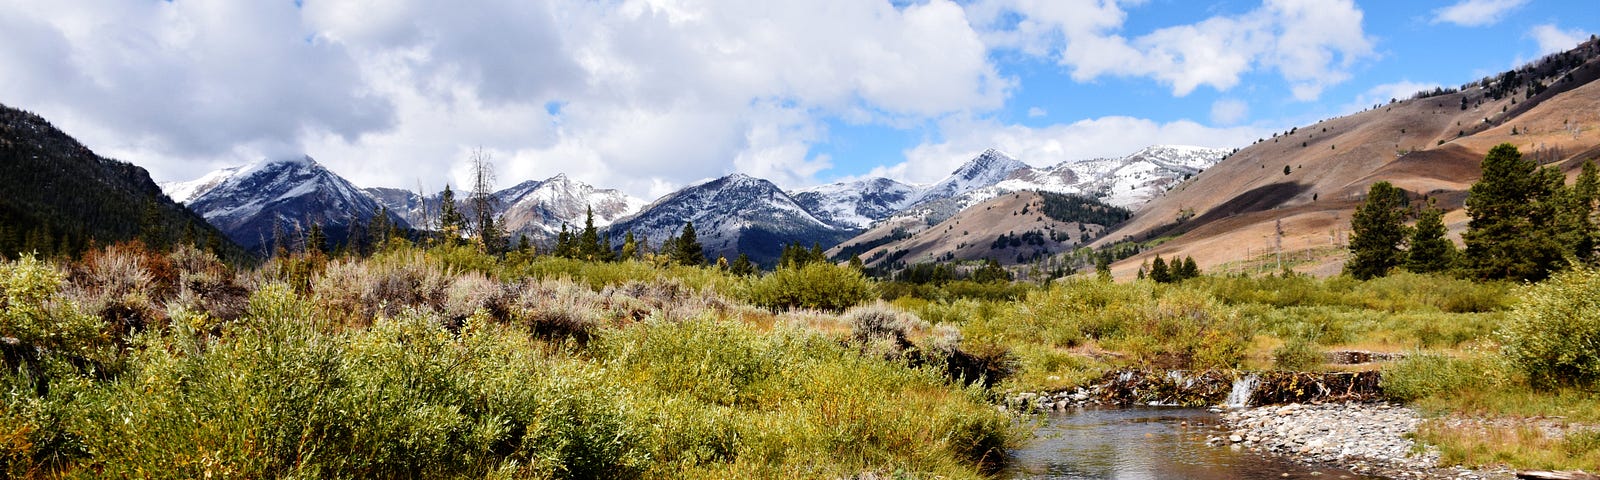 First snow of the season on the peaks throughout the Lost River Ranger District, Salmon-Challis National Forest